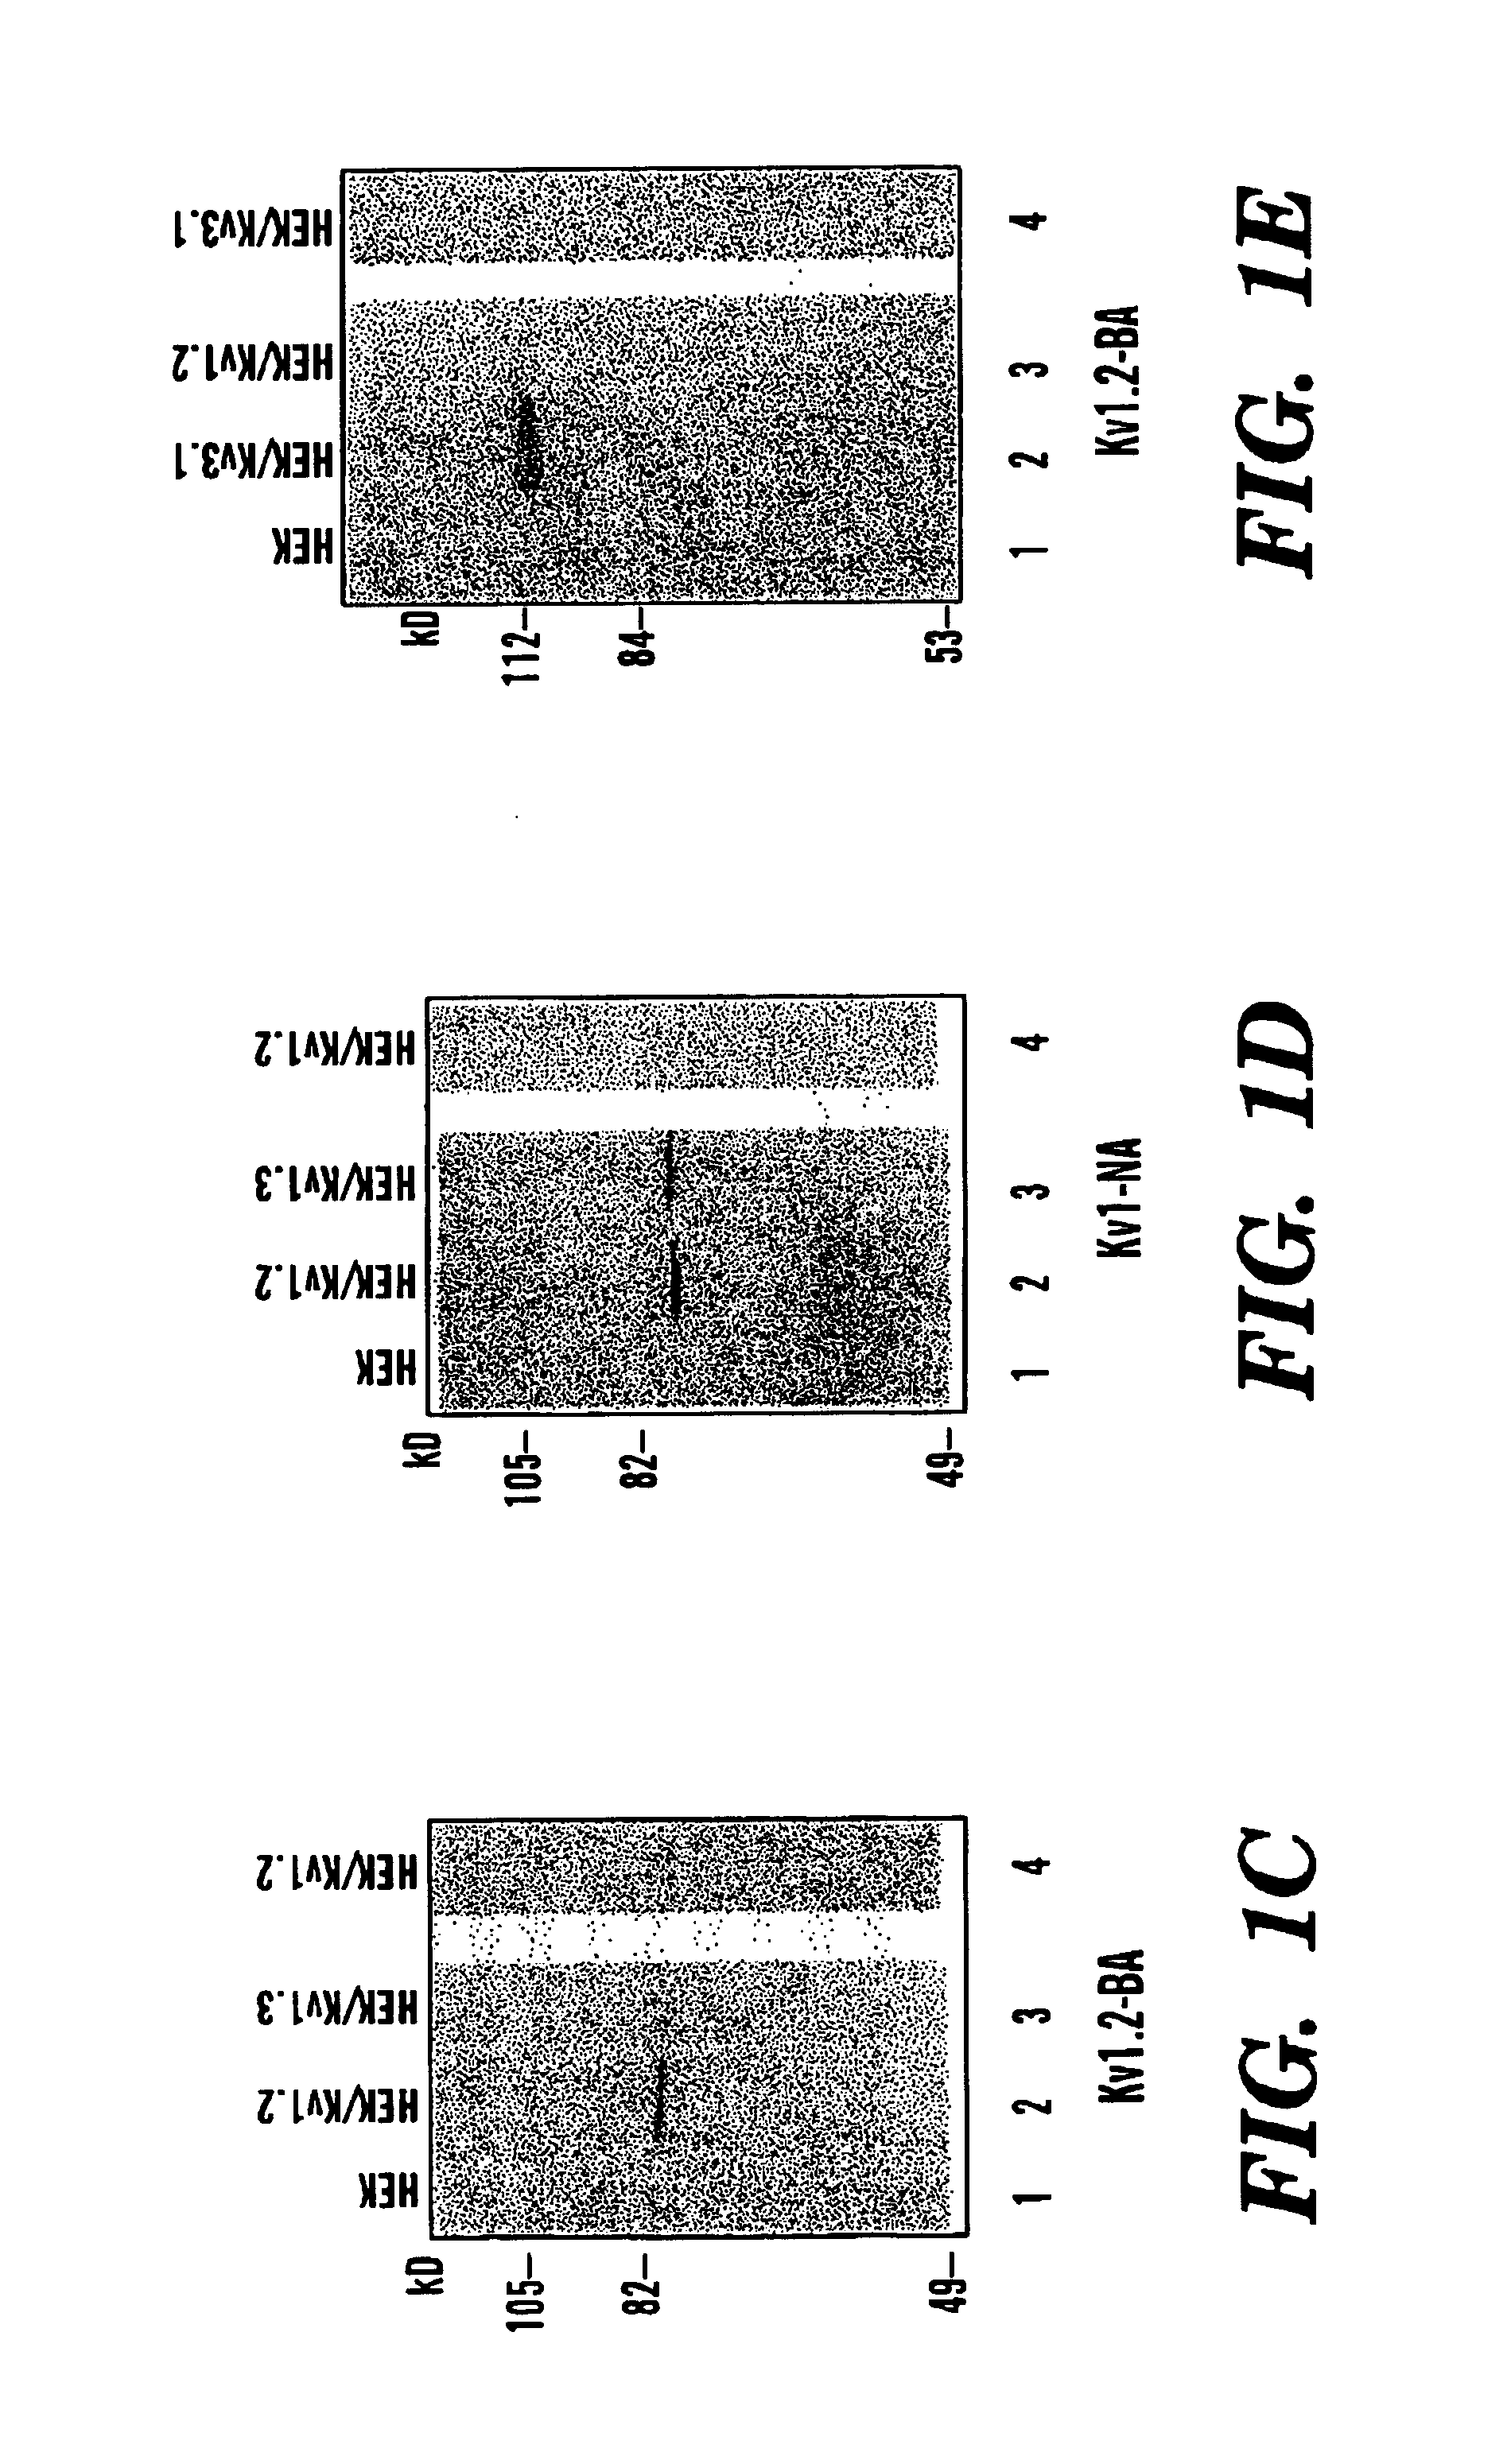 Methods for designing specific ion channel blockers